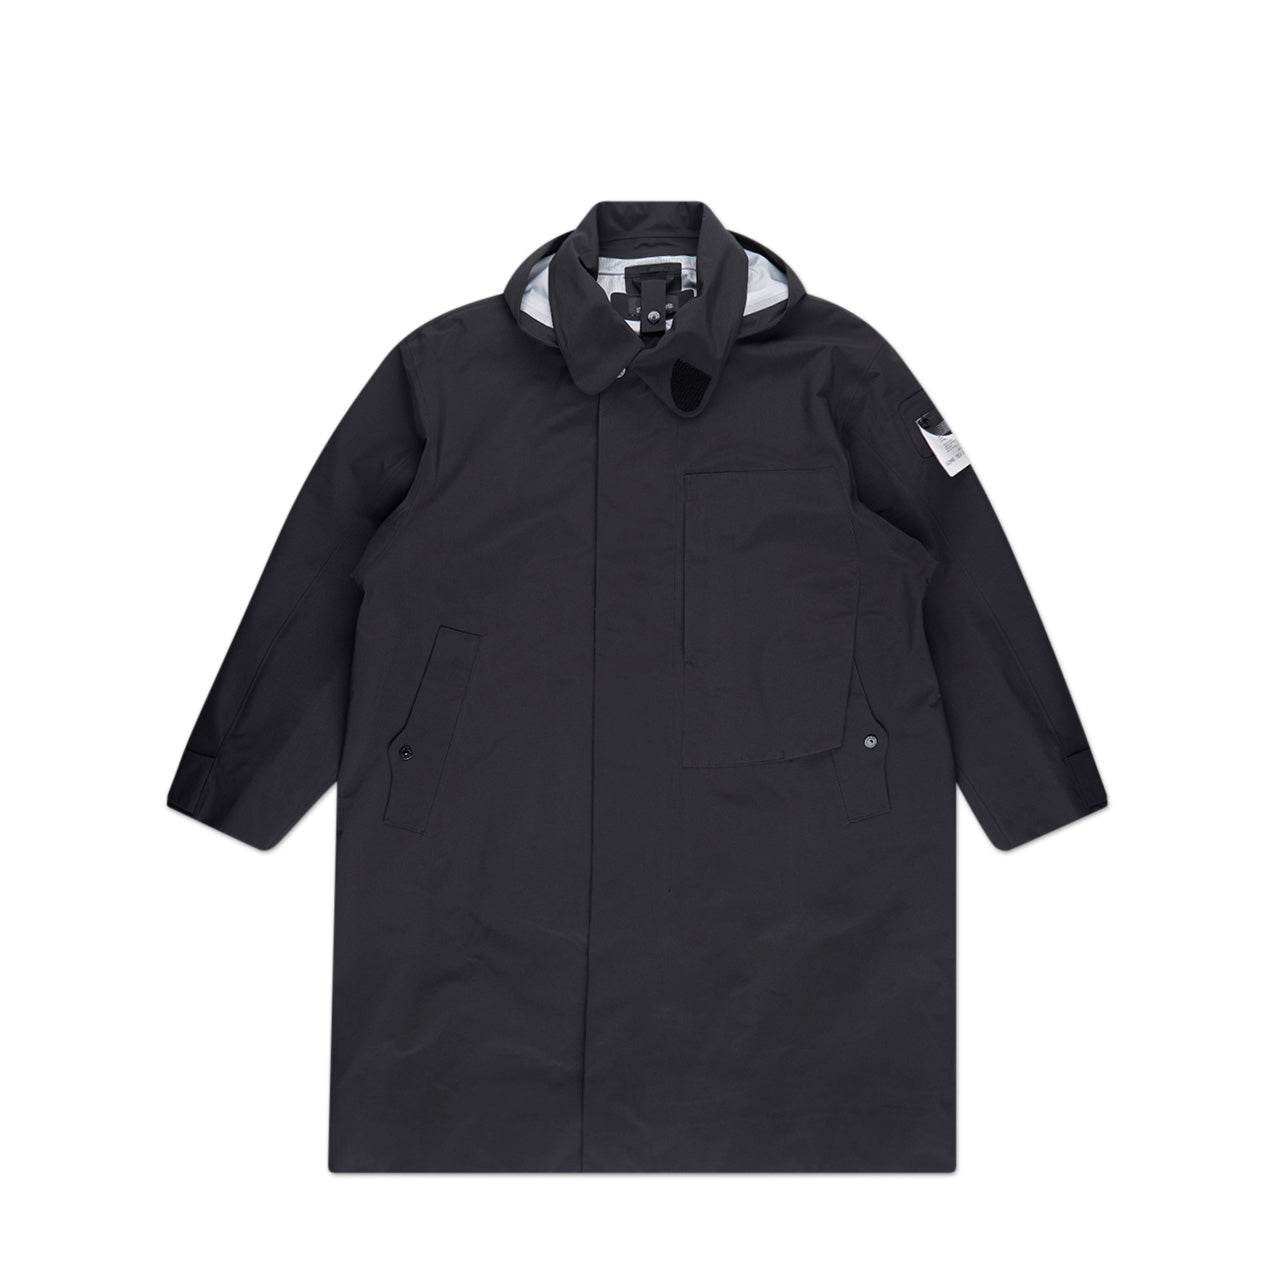 stone island shadow project trench coat (black)